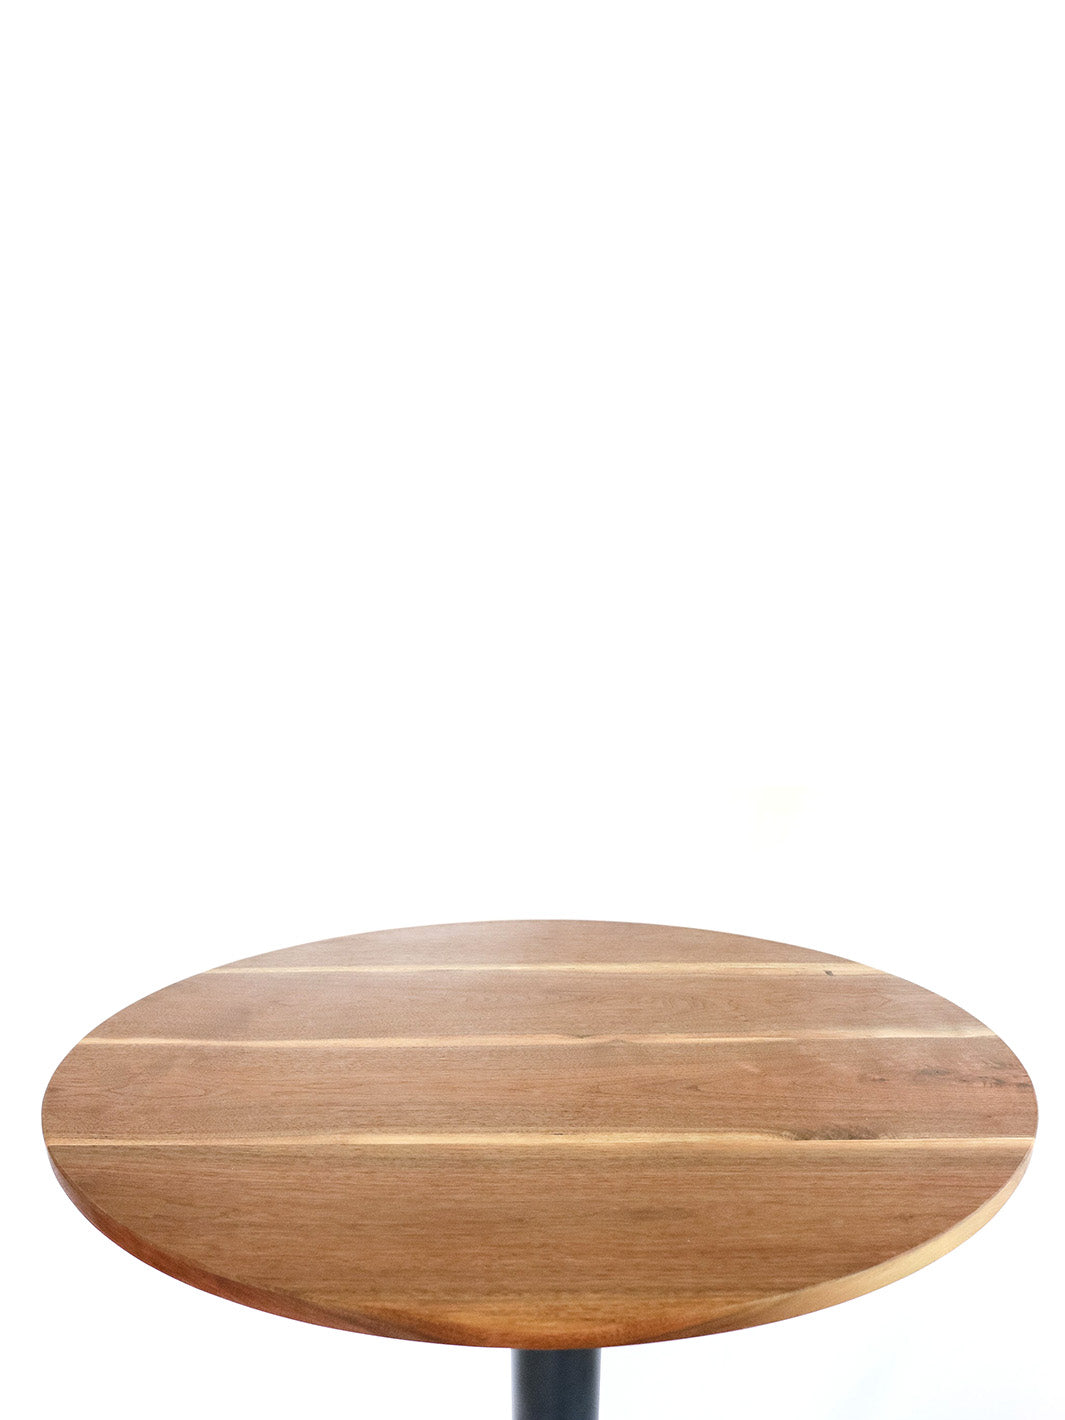 Modern Round Walnut Pub Table with Black Steel Legs | Bar or Standard Height Earthly Comfort Dining Tables 804-5